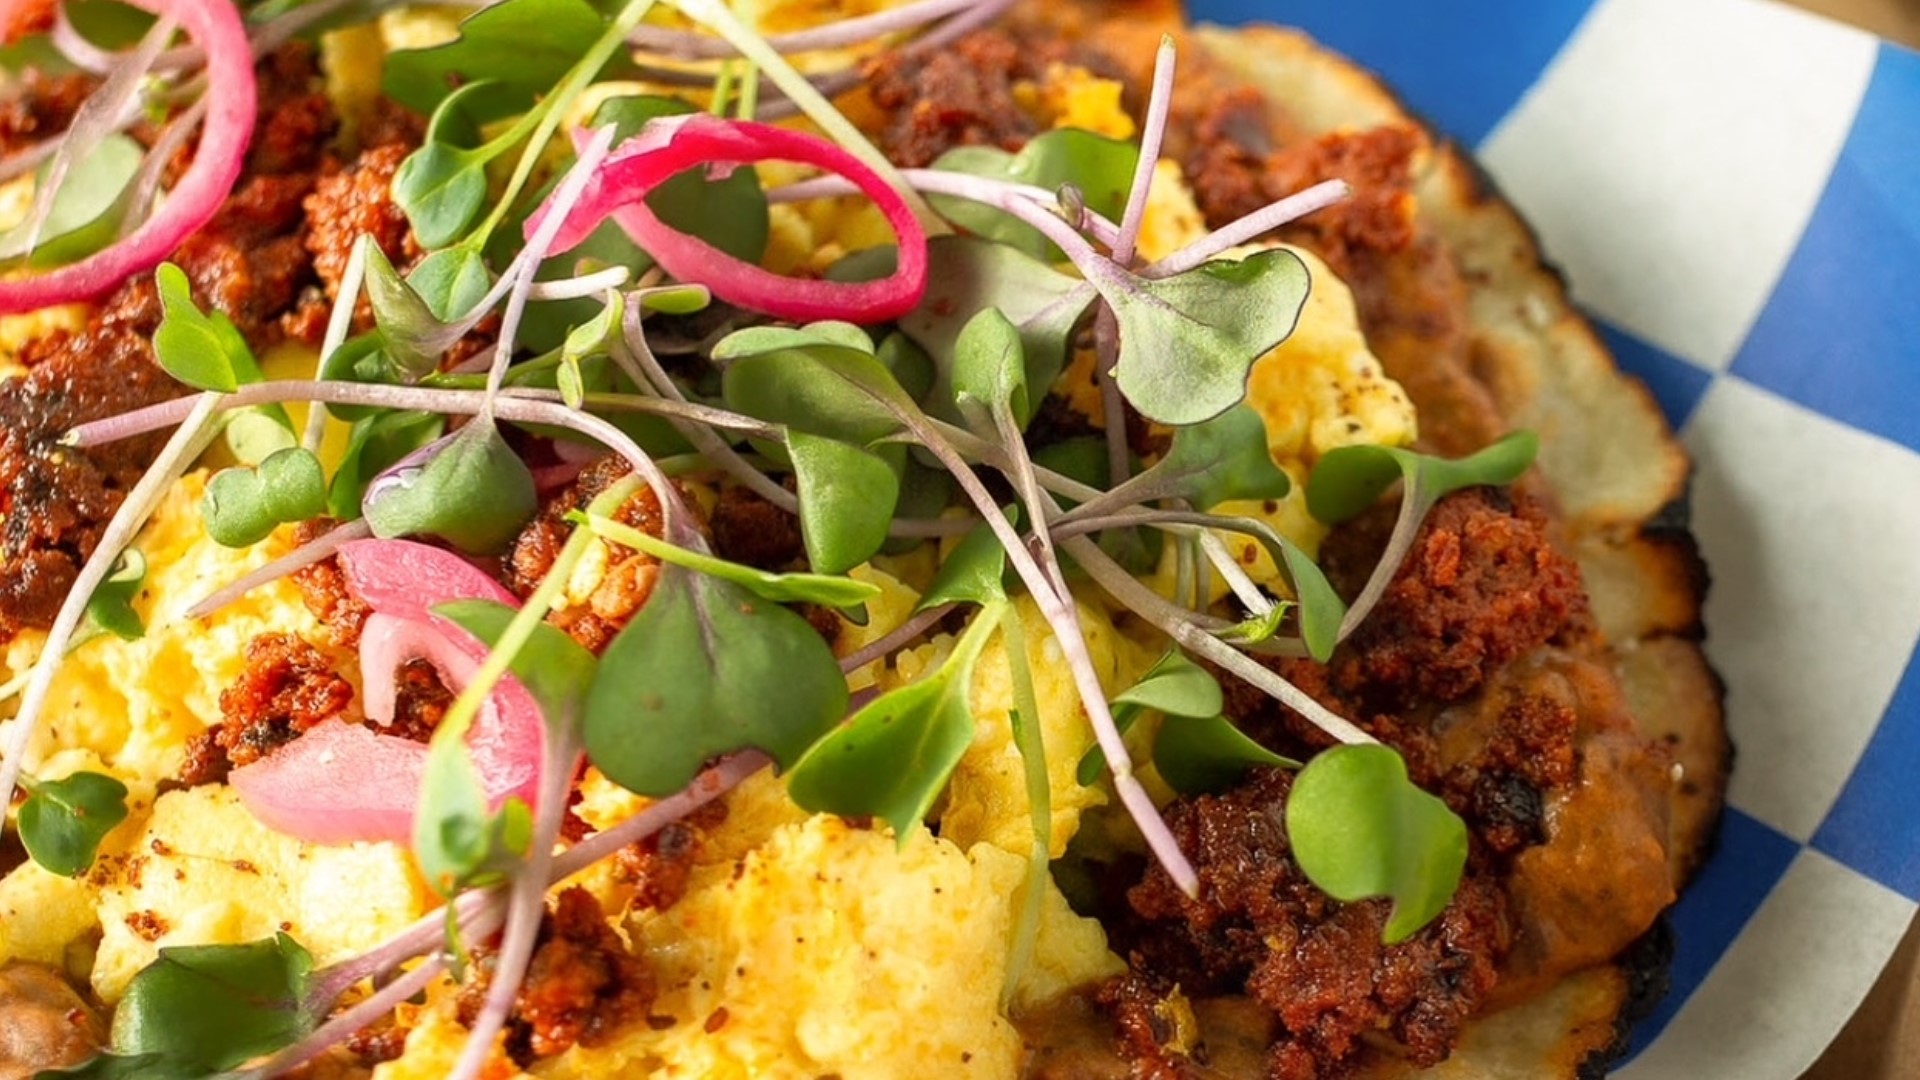 Good Morning is a pop-up slinging classic Texas breakfast tacos. #k5evening